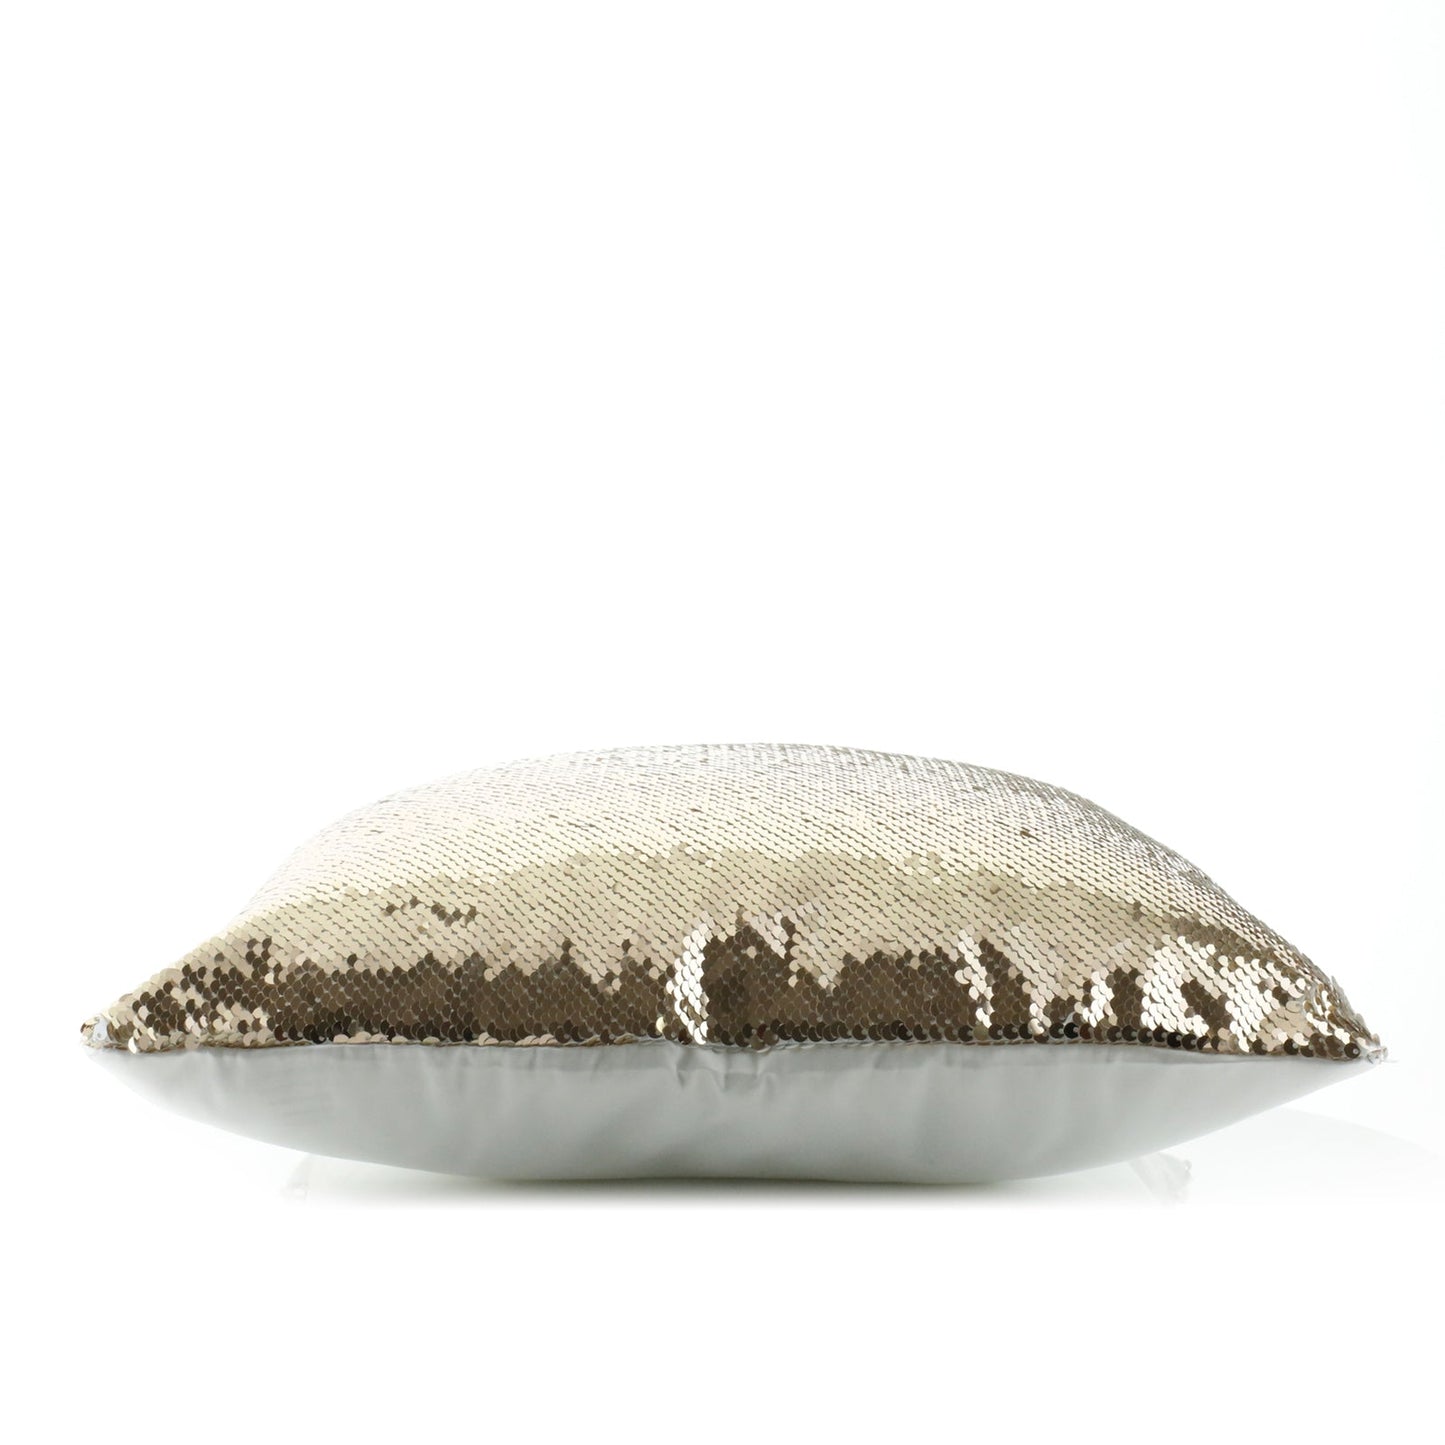 Personalised Sequin Cushion with Cow Skull Feathers and Cute Text